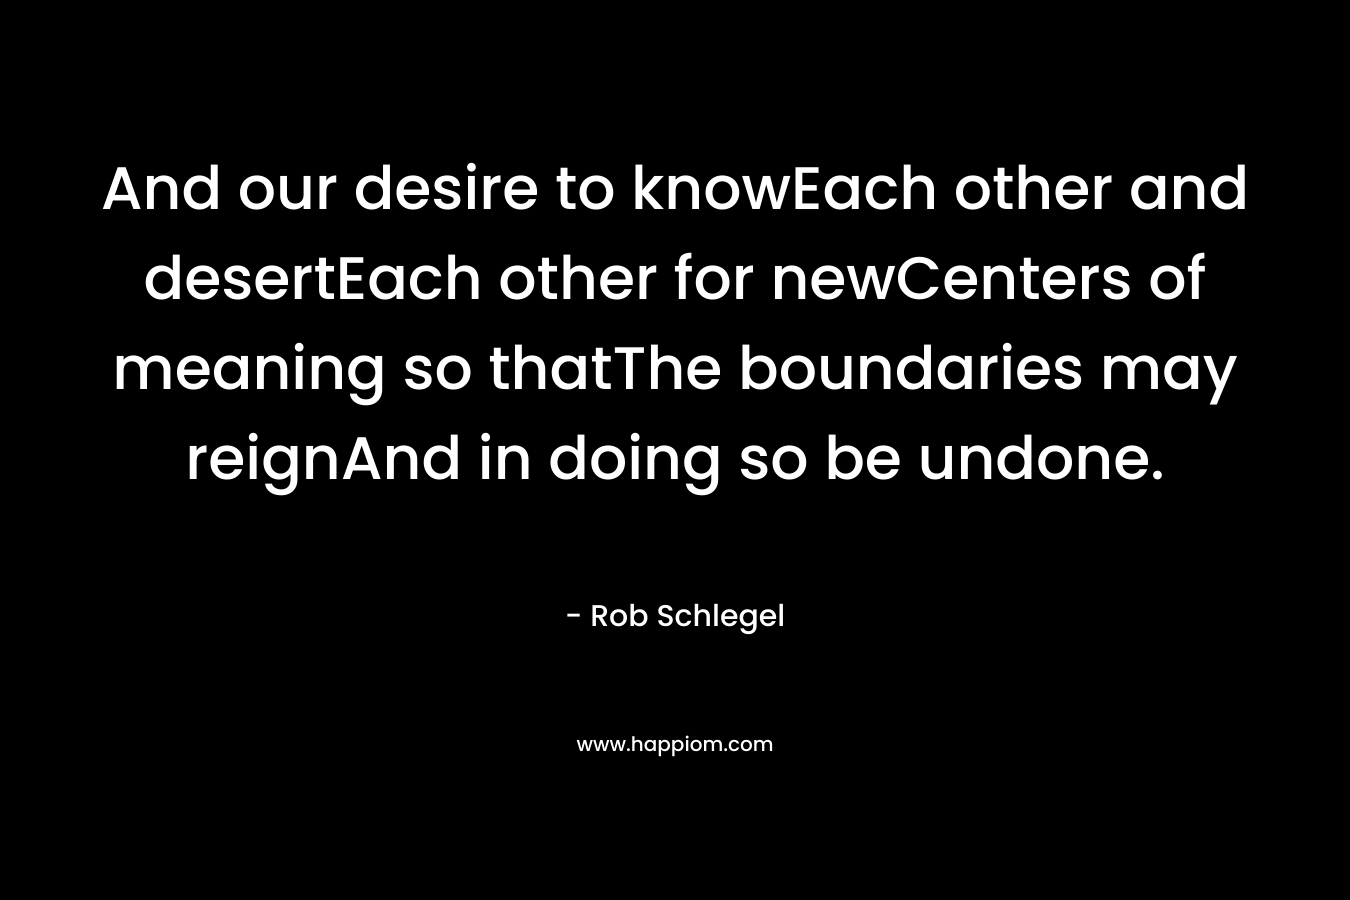 And our desire to knowEach other and desertEach other for newCenters of meaning so thatThe boundaries may reignAnd in doing so be undone. – Rob Schlegel